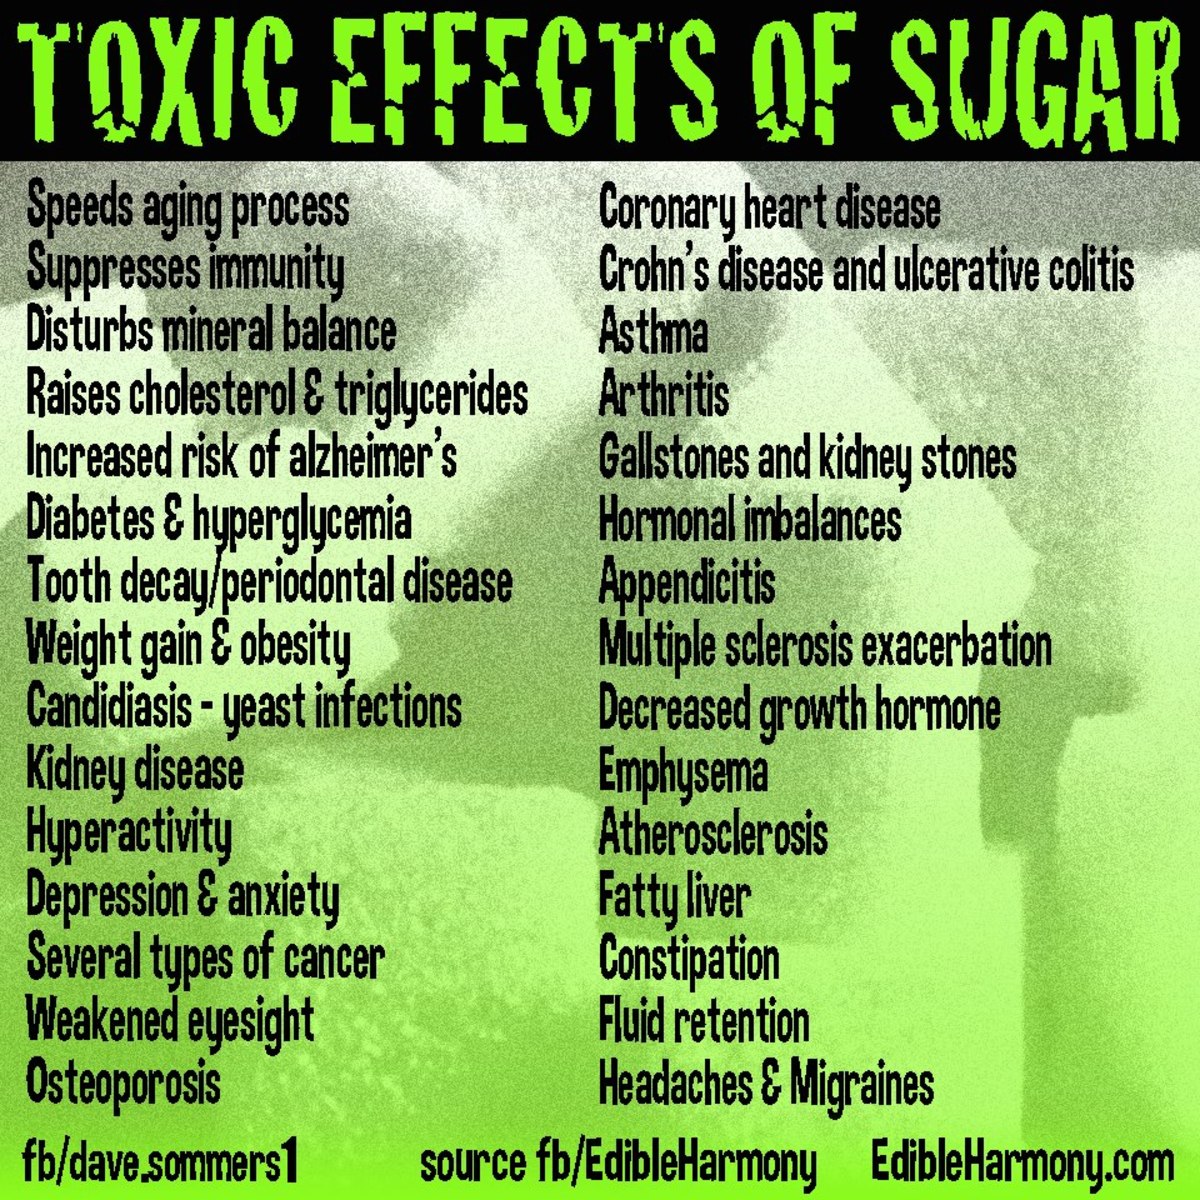 The Harmful Effects of Sugar on the Human Body